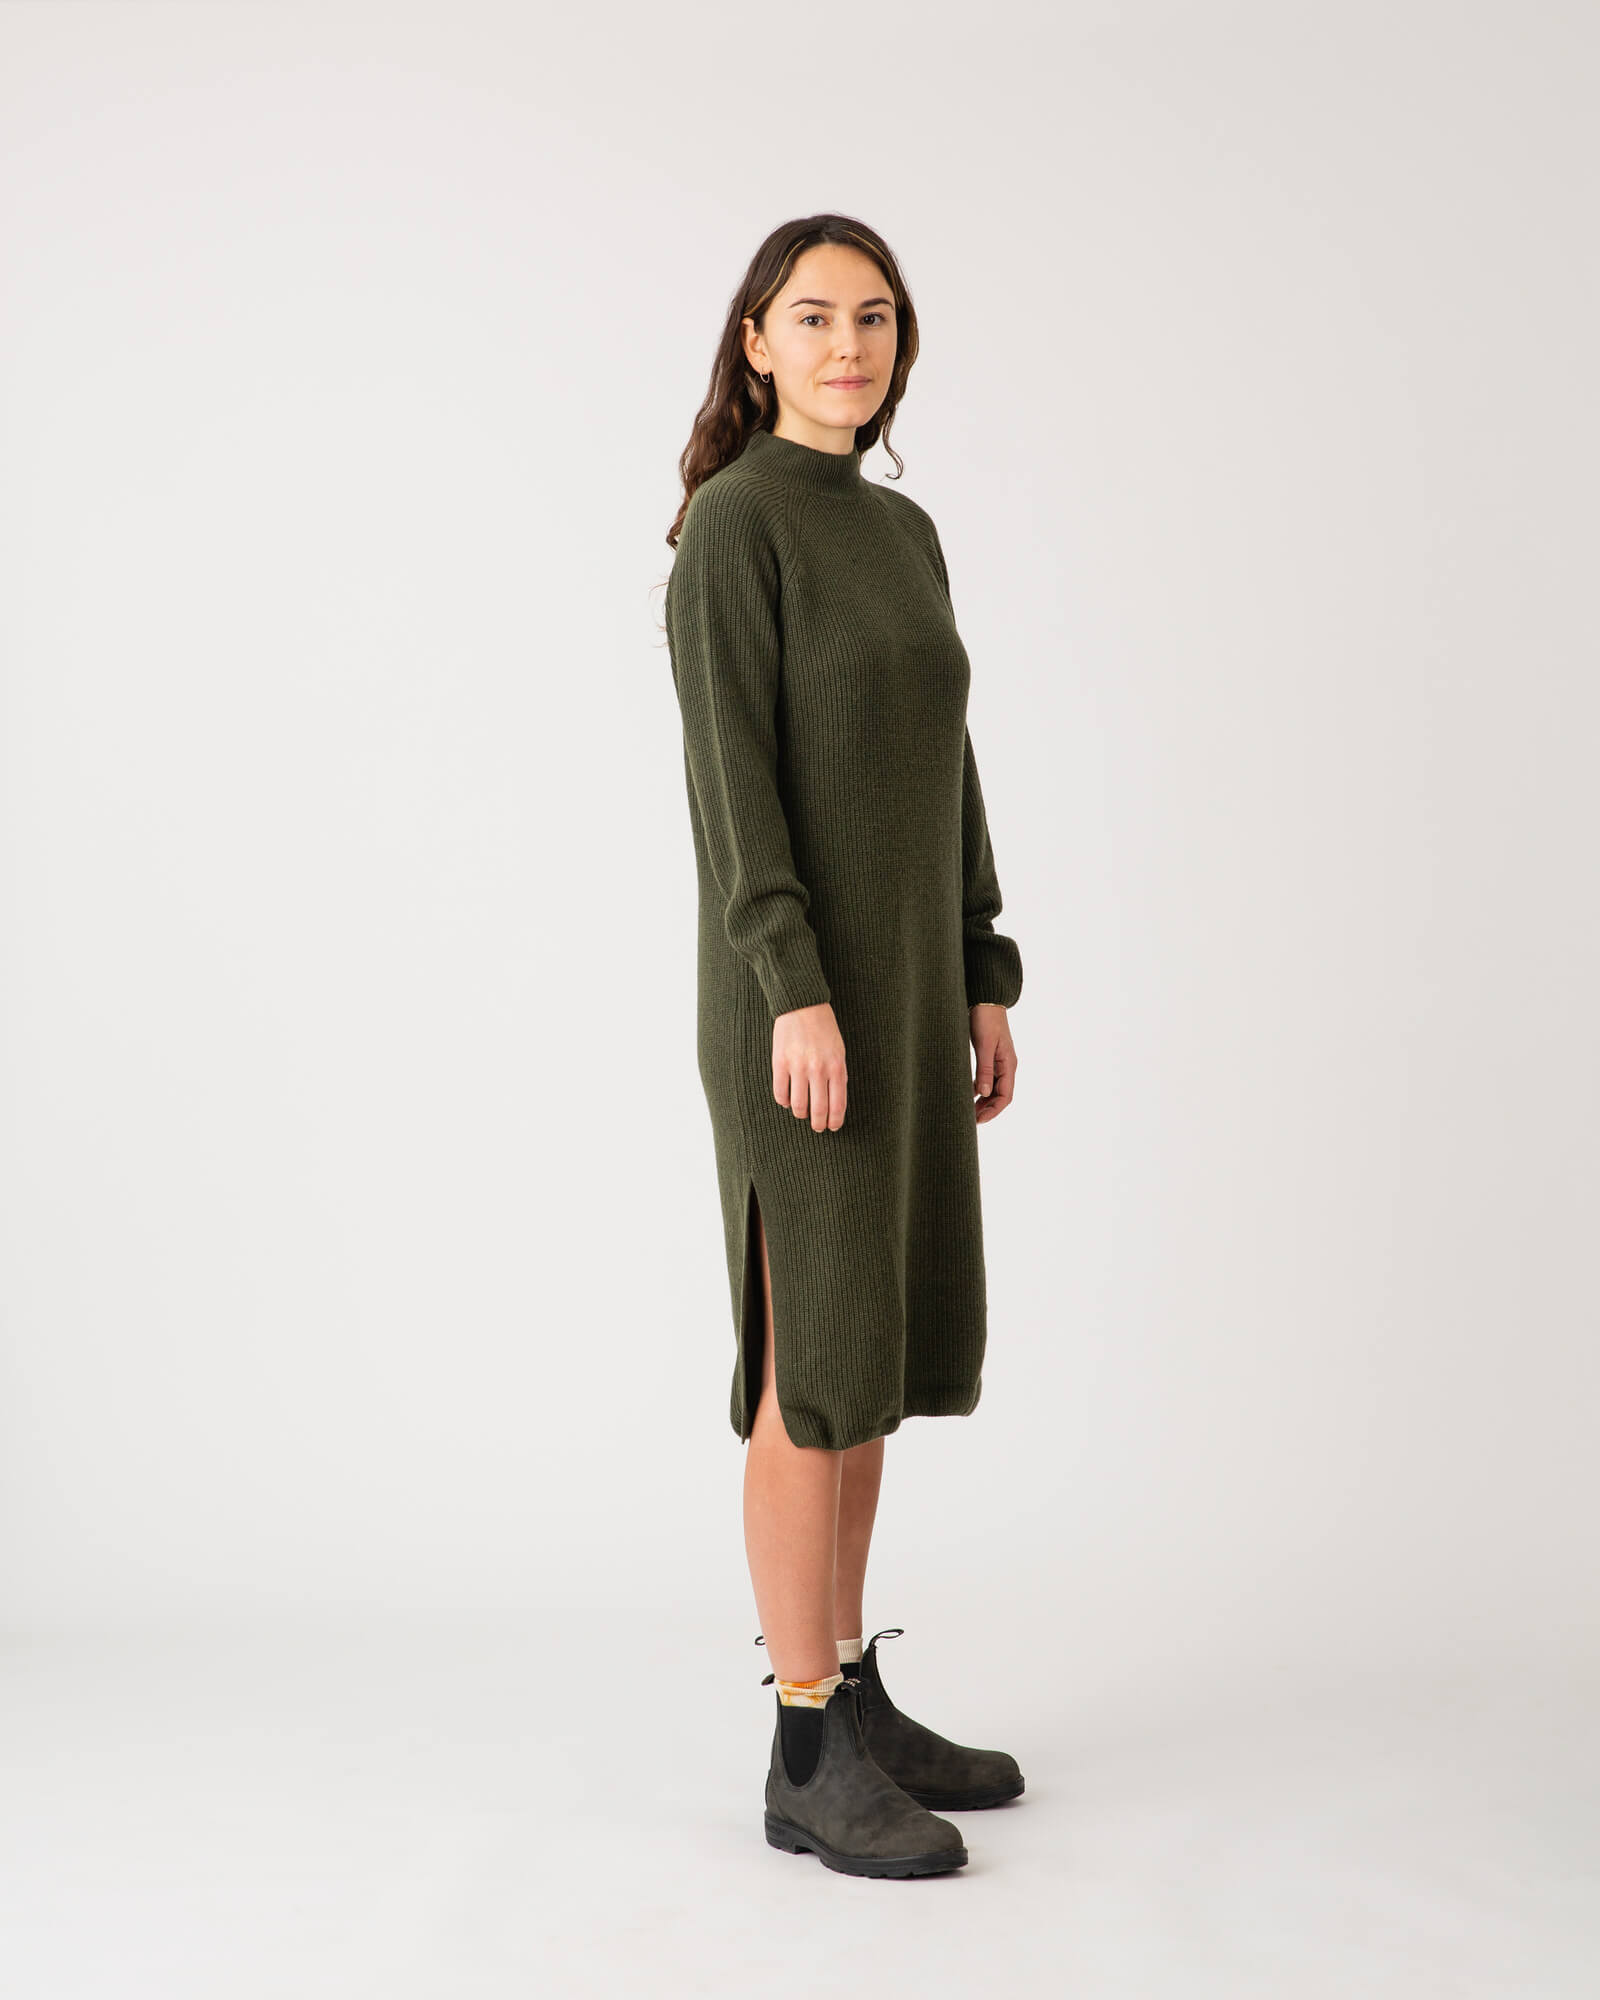 Dark green knitted loden dress made from recycled wool by Matona